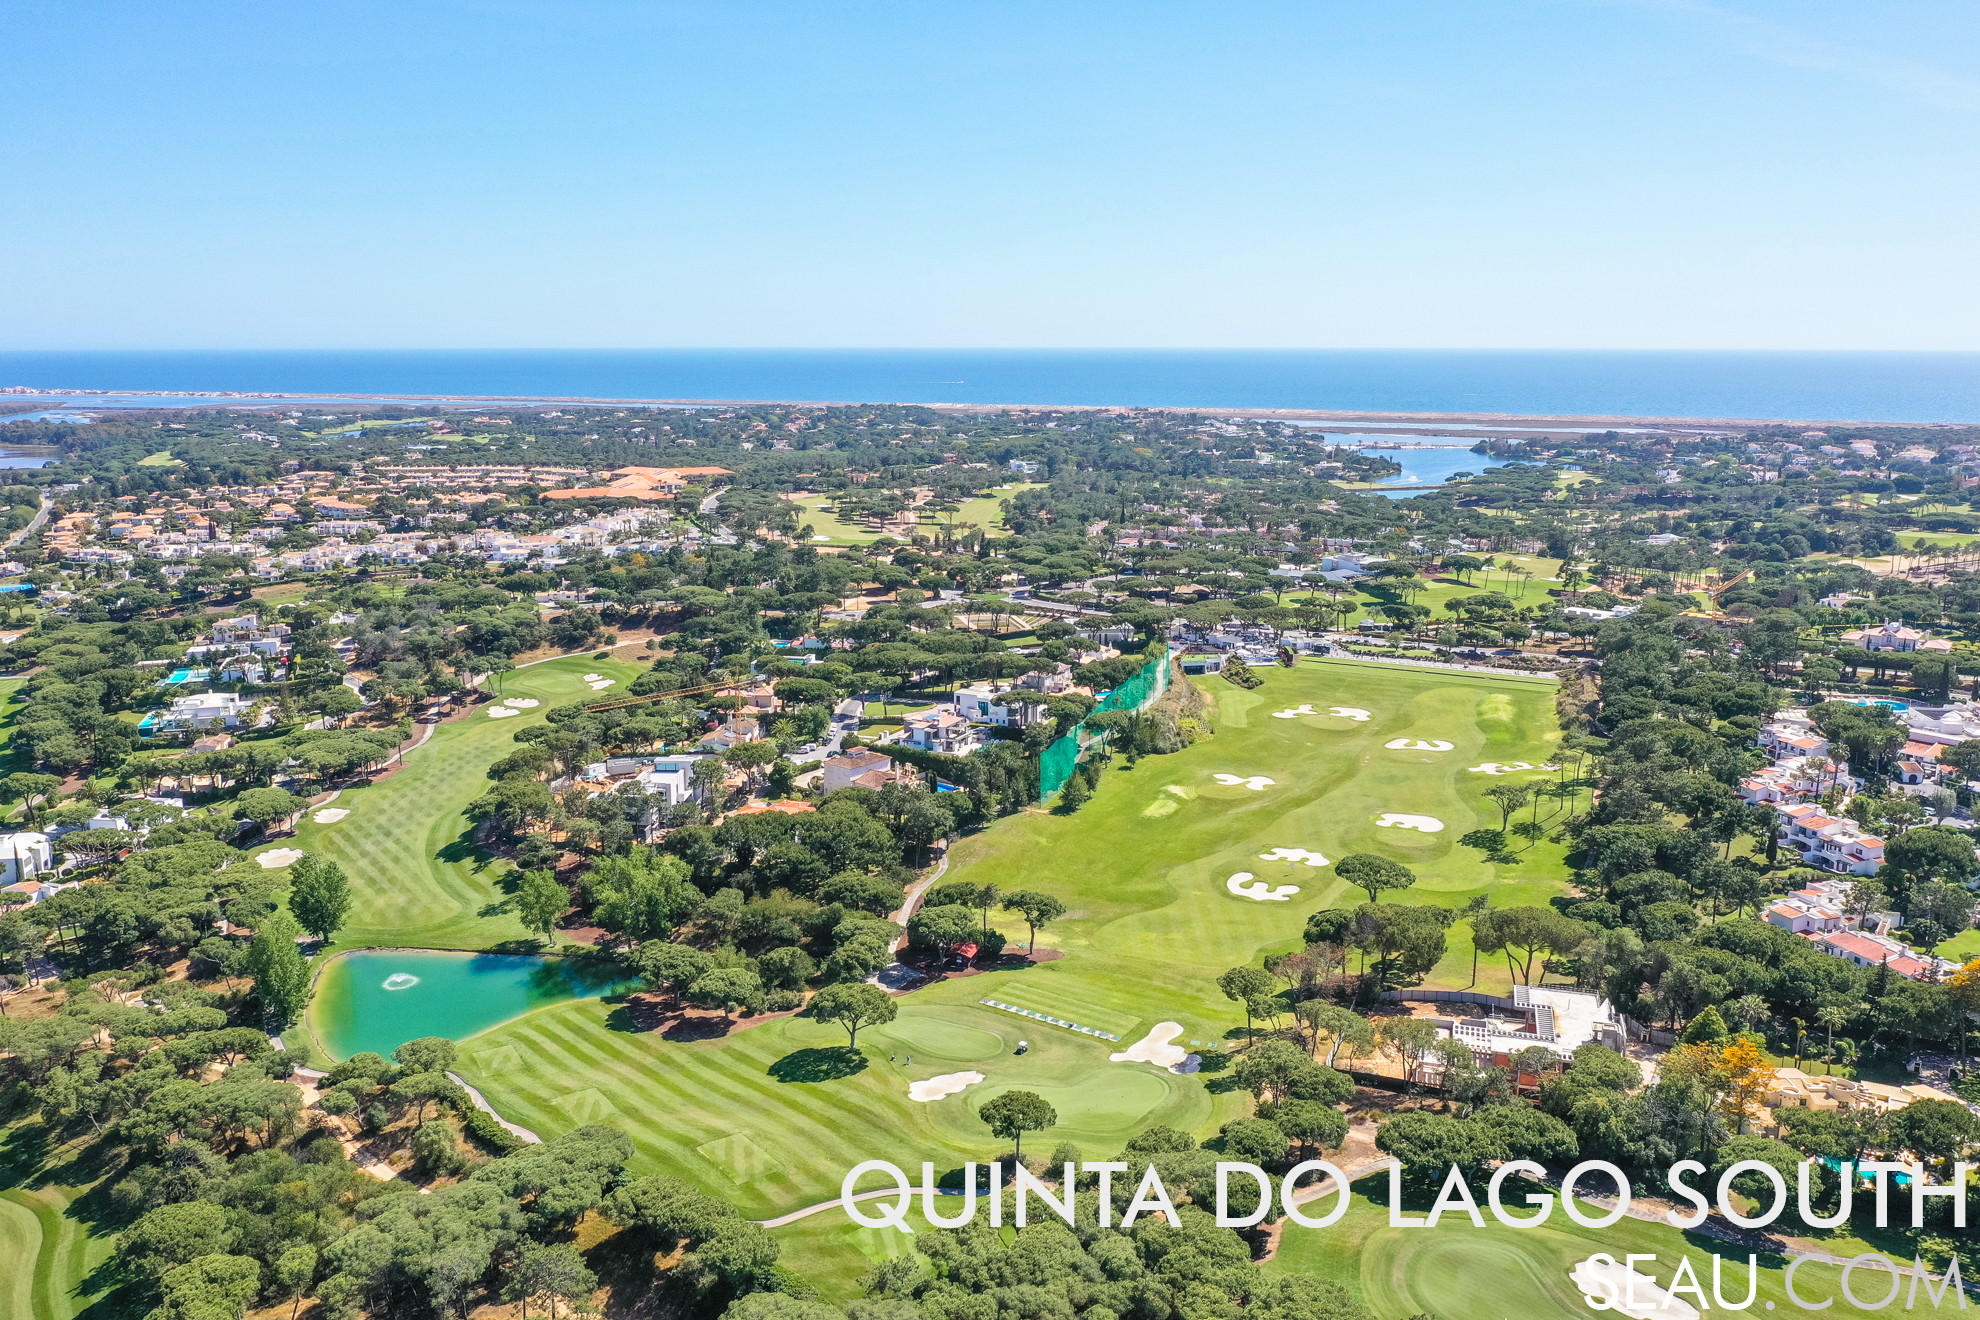 Quinta do Lago Sul is the Quinta do Lago area located south of the 4th roundabout, where we find the Quinta do Lago Sul golf course, the Quinta do Lago lake, the beach access bridge, and the Ria Formosa. In this image we can highlight the golf training course, the golf course, the houses, and some urbanizations in Quinta do Lago. In the background we see the lake and the sea